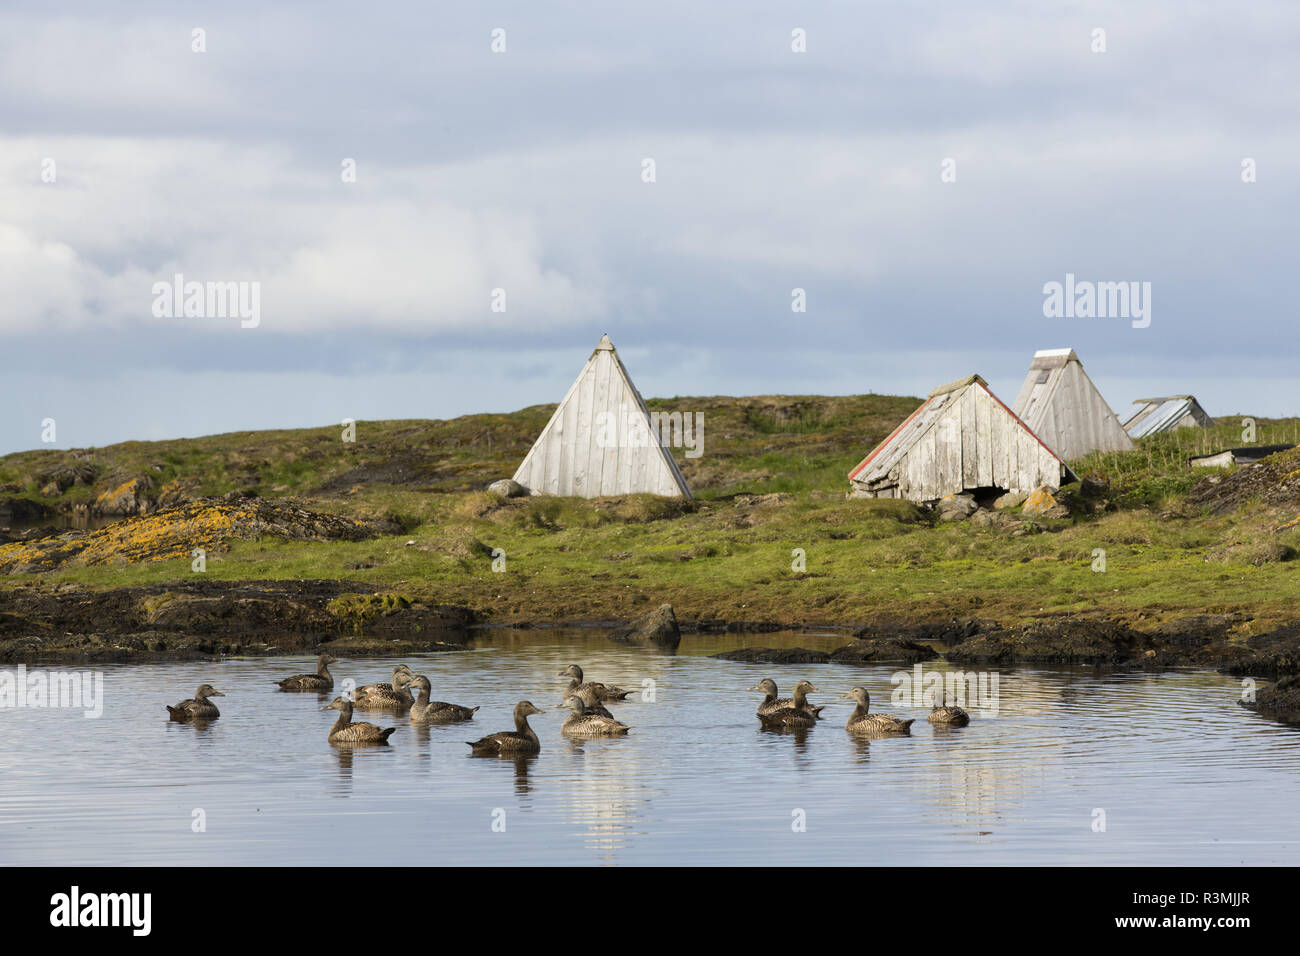 Common Eider (Somateria mollissima) female. Down collecting in Lanan island. There are specific shelters with many different shape for the wild ducks. Vega archipelago, Norway Stock Photo